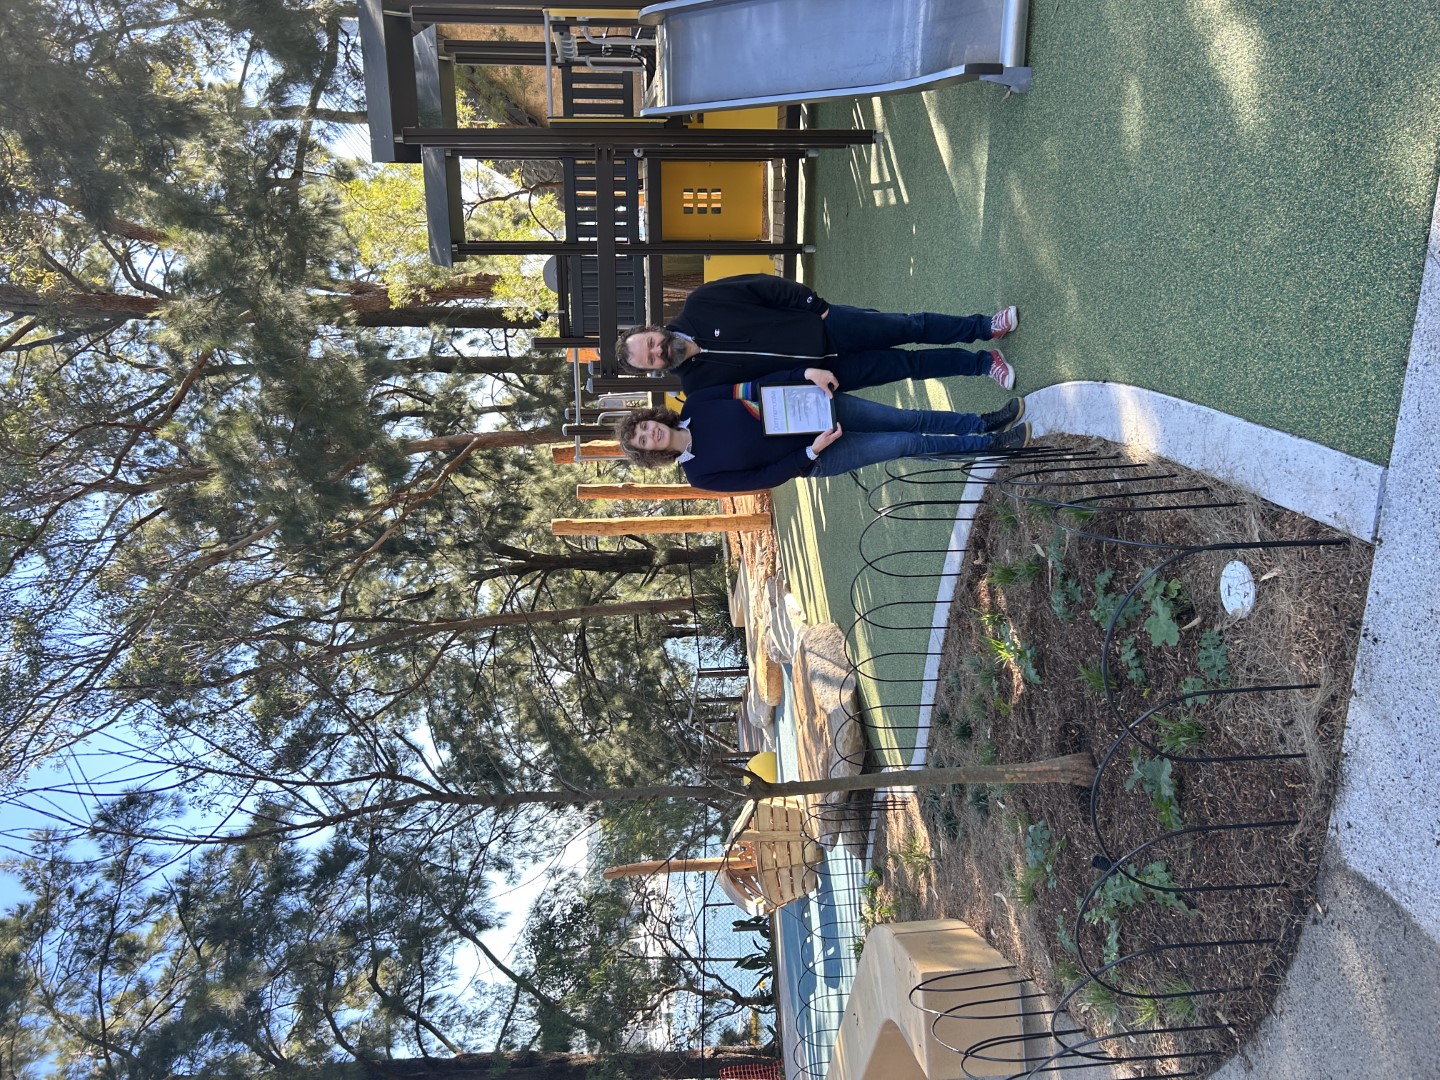 Two people standing in front of a playground next to a tree